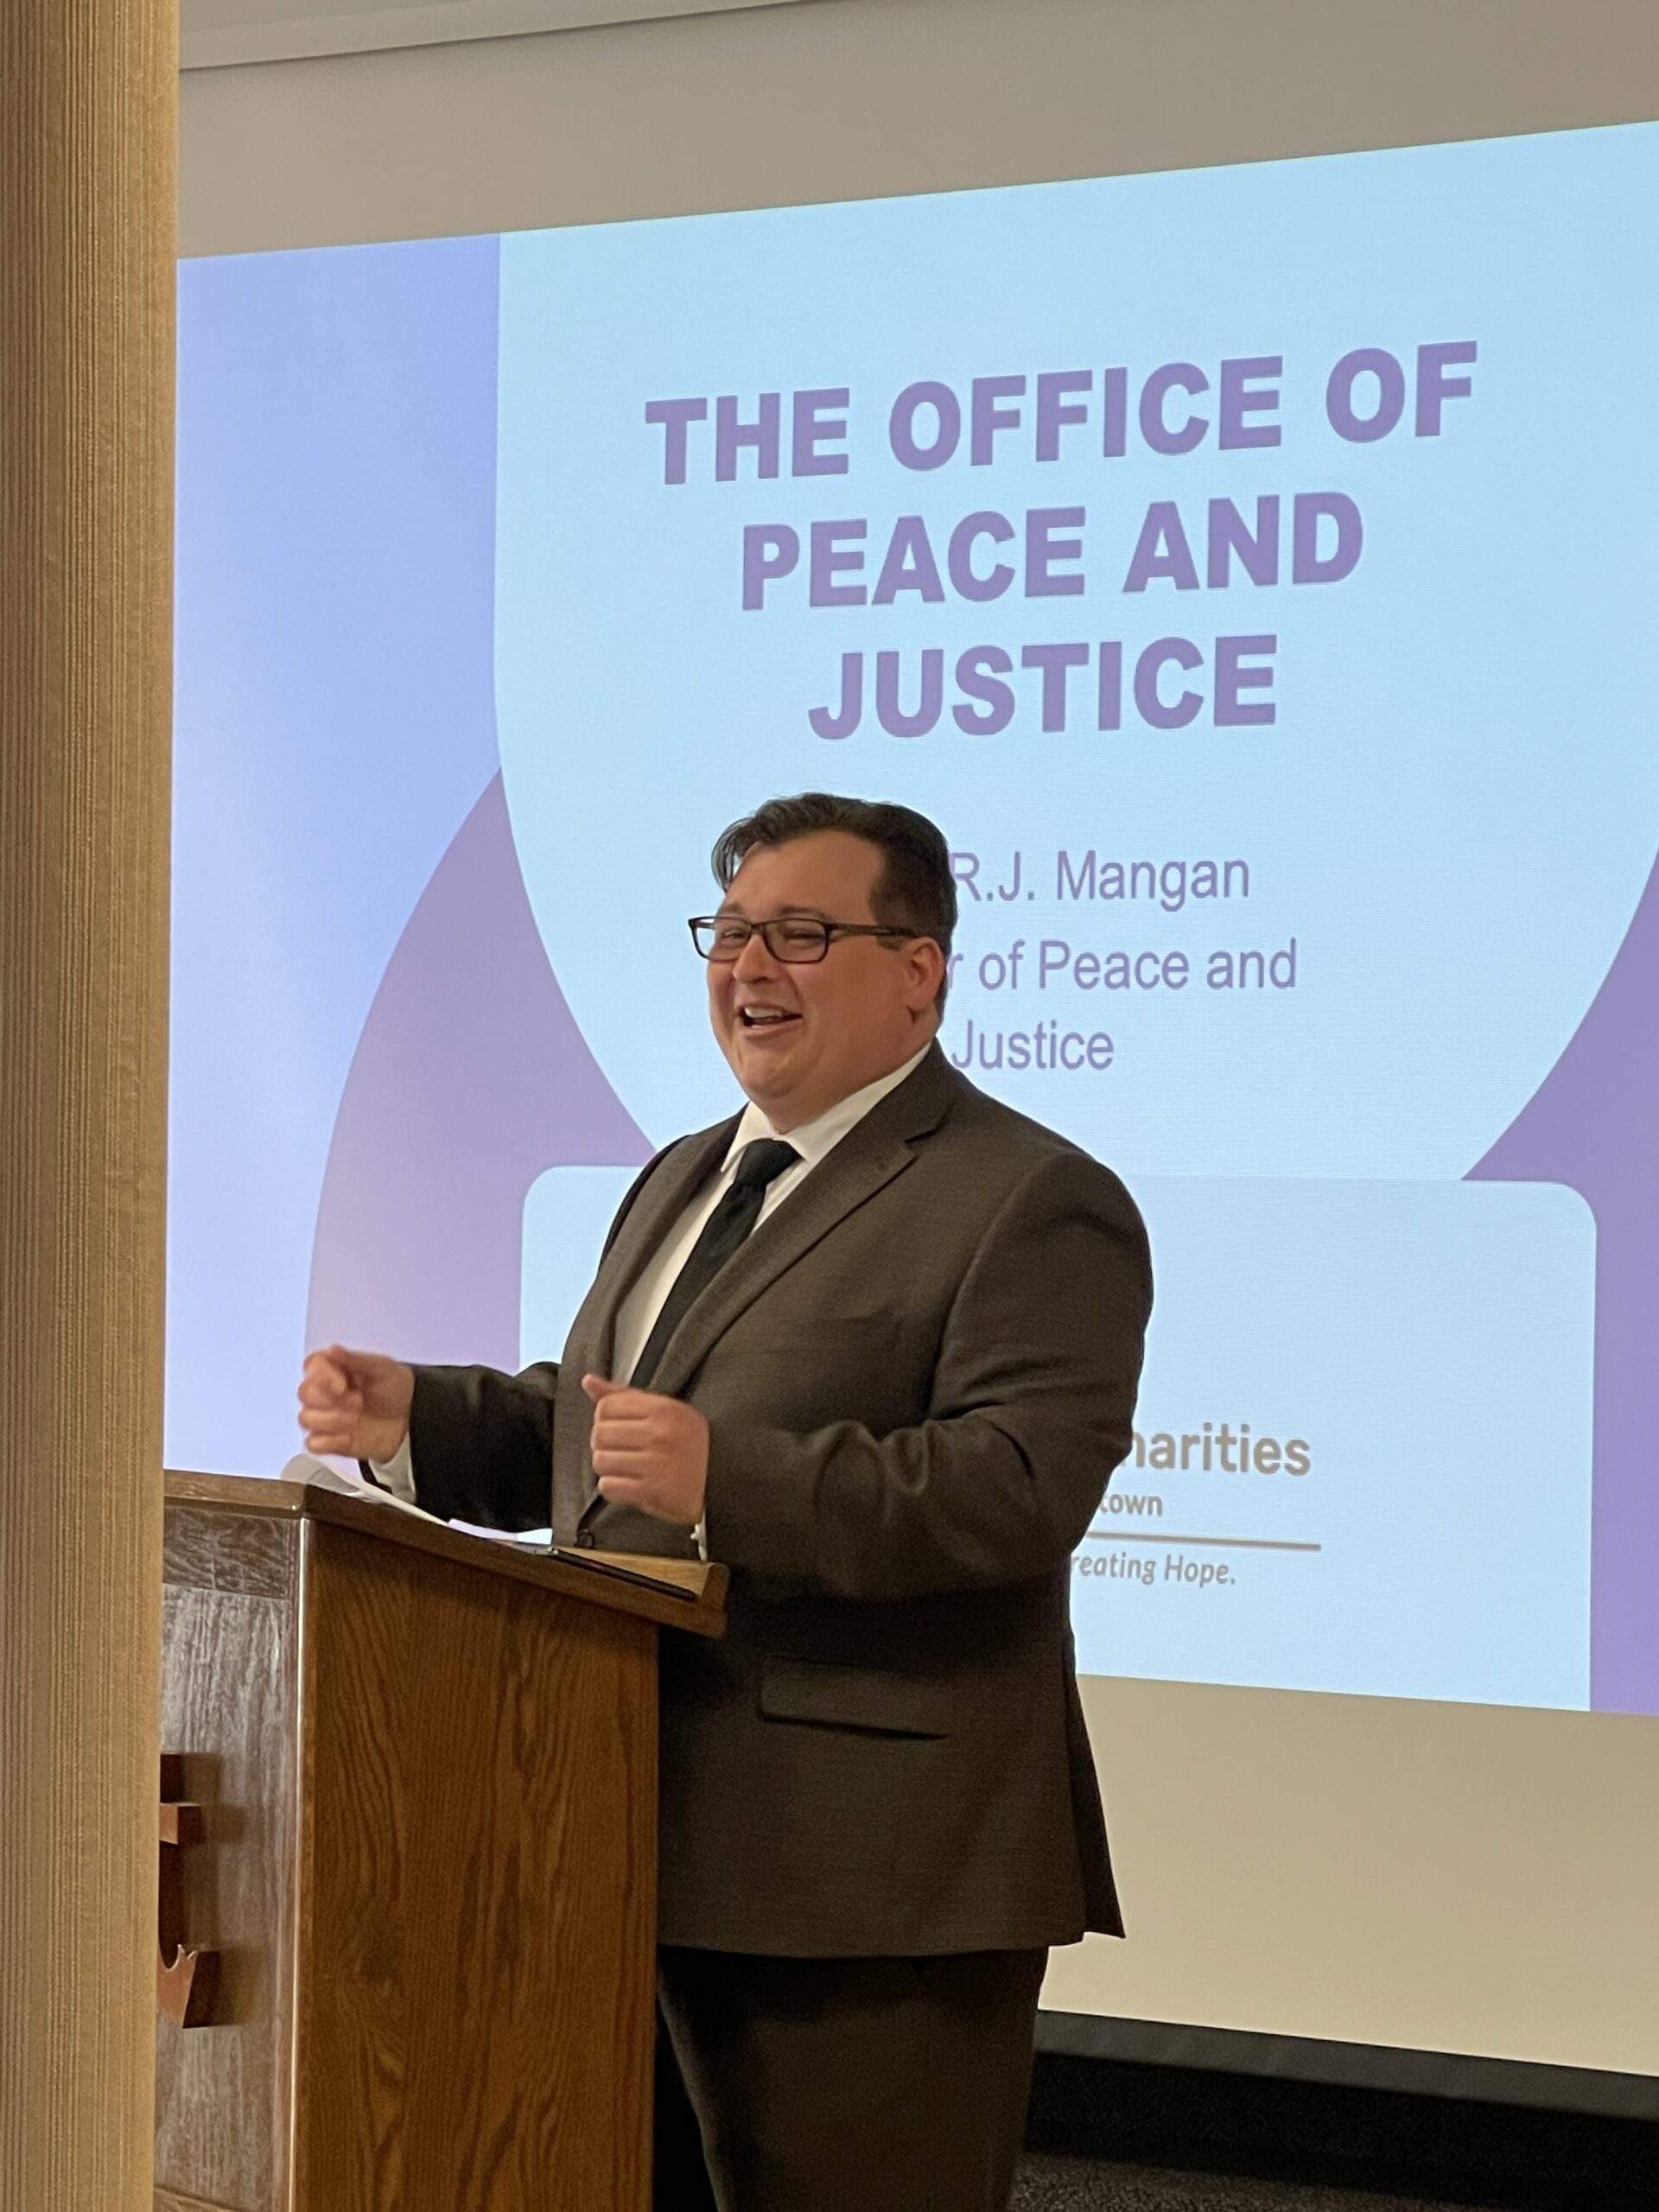 R.J. Mangan, Catholic Charities' Director of Peace and Justice, stands at a podium and runs a presentation.